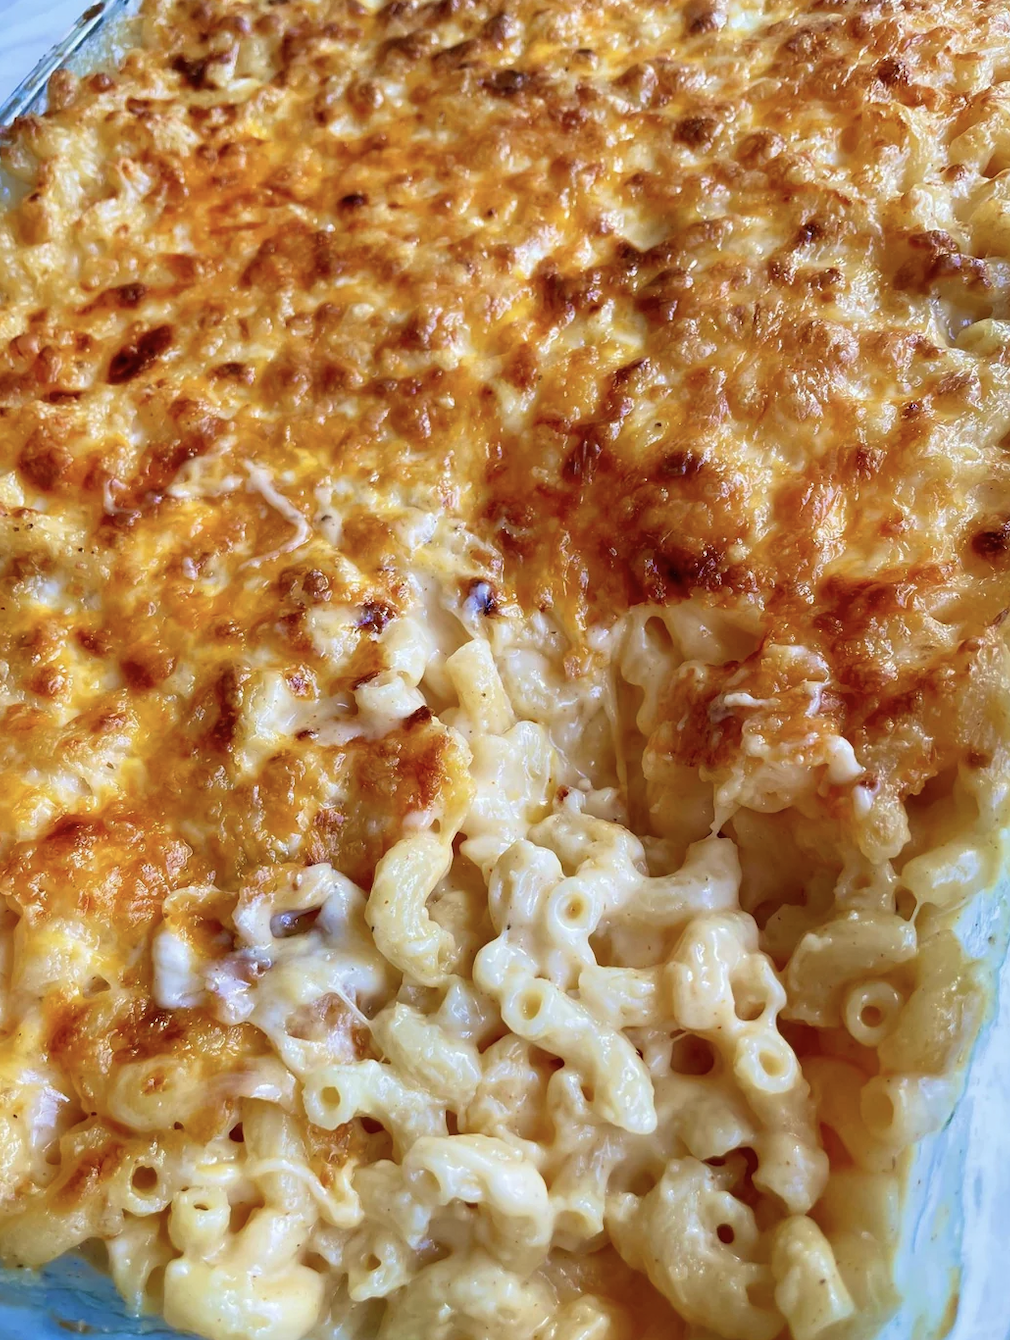 Baked macaroni and cheese in a dish with a golden-brown crust